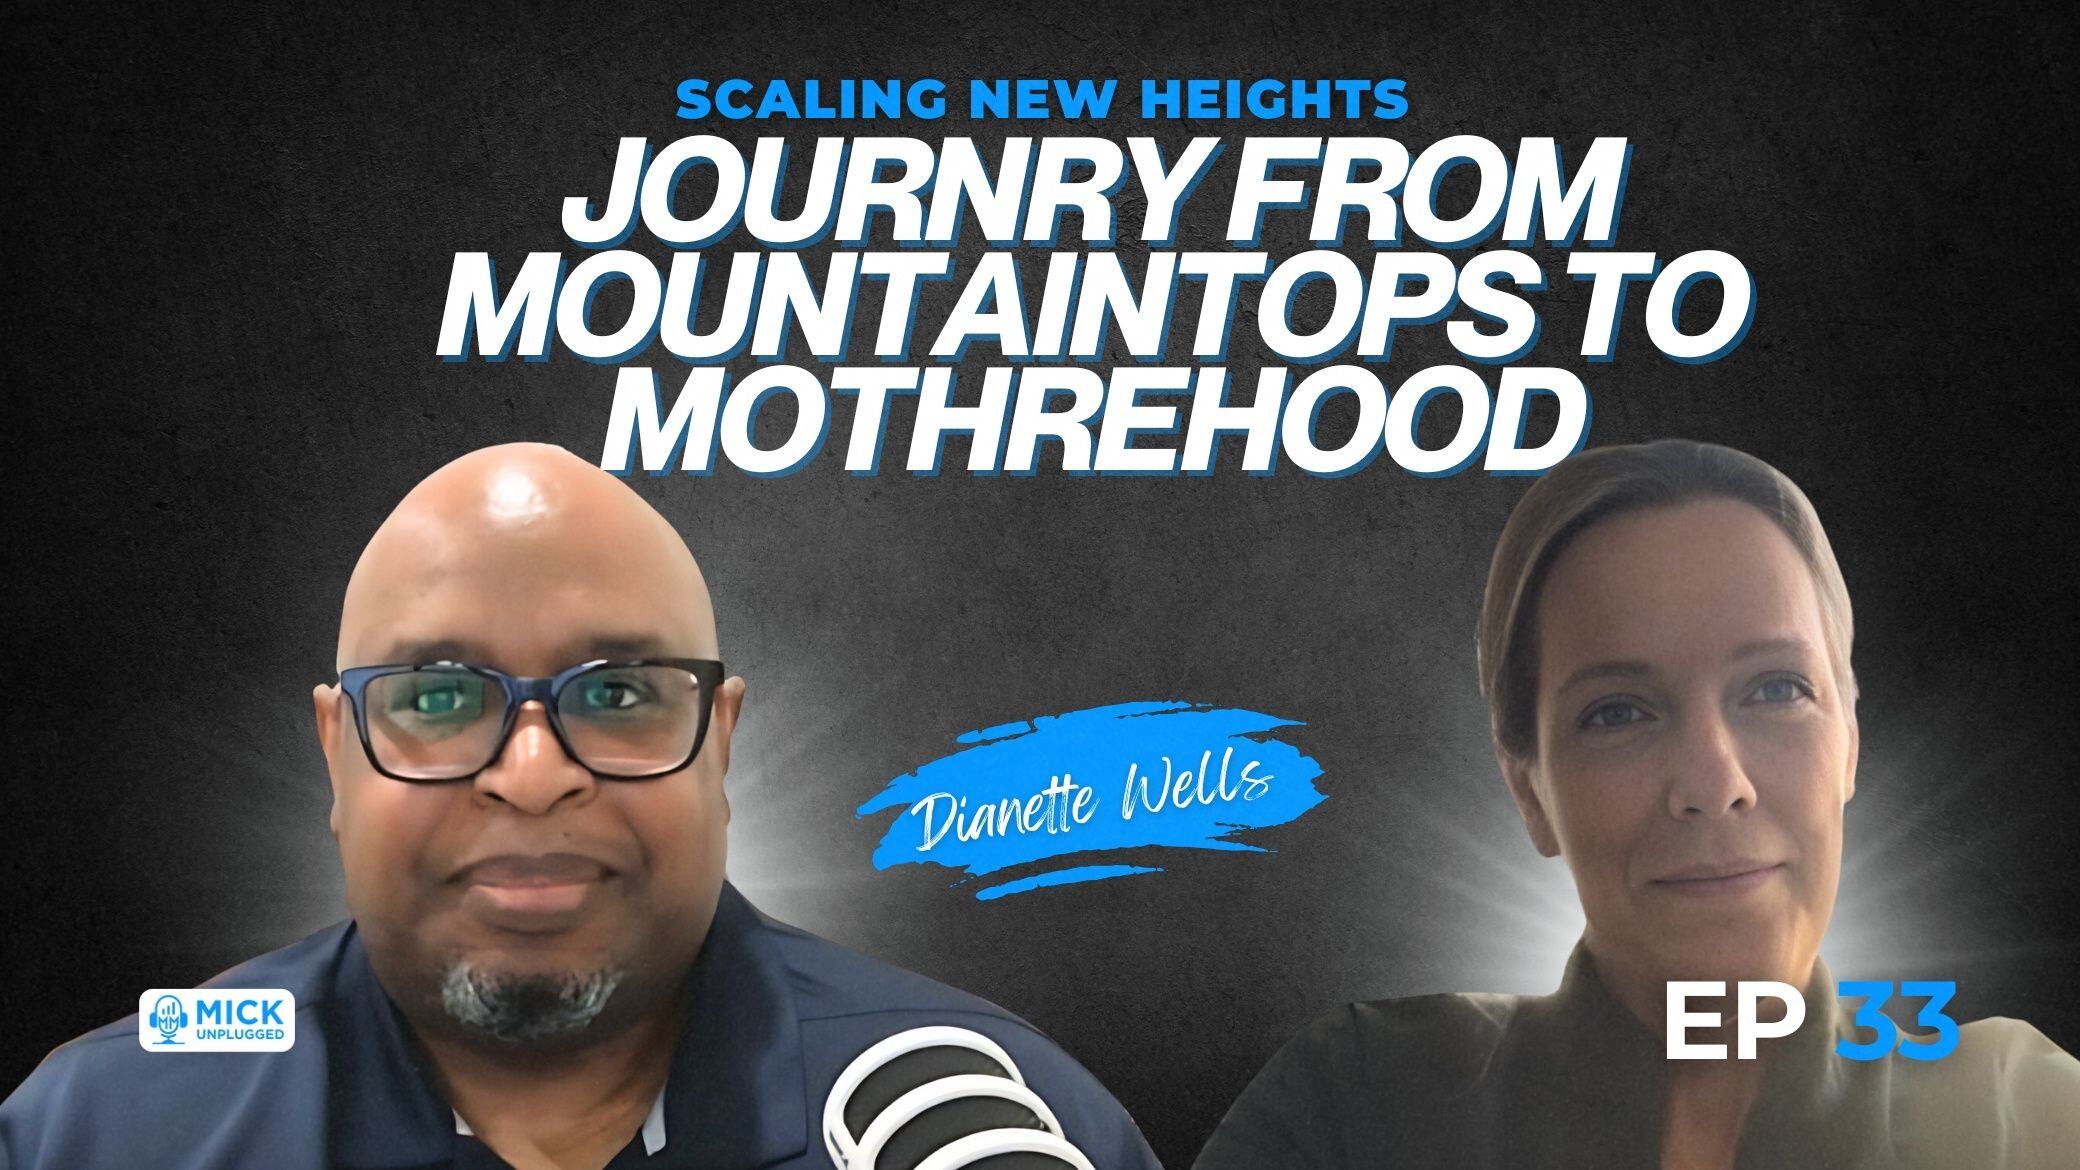 Dianette Wells | Scaling New Heights: Journey from Mountaintops to Motherhood - Mick Unplugged [EP 33]